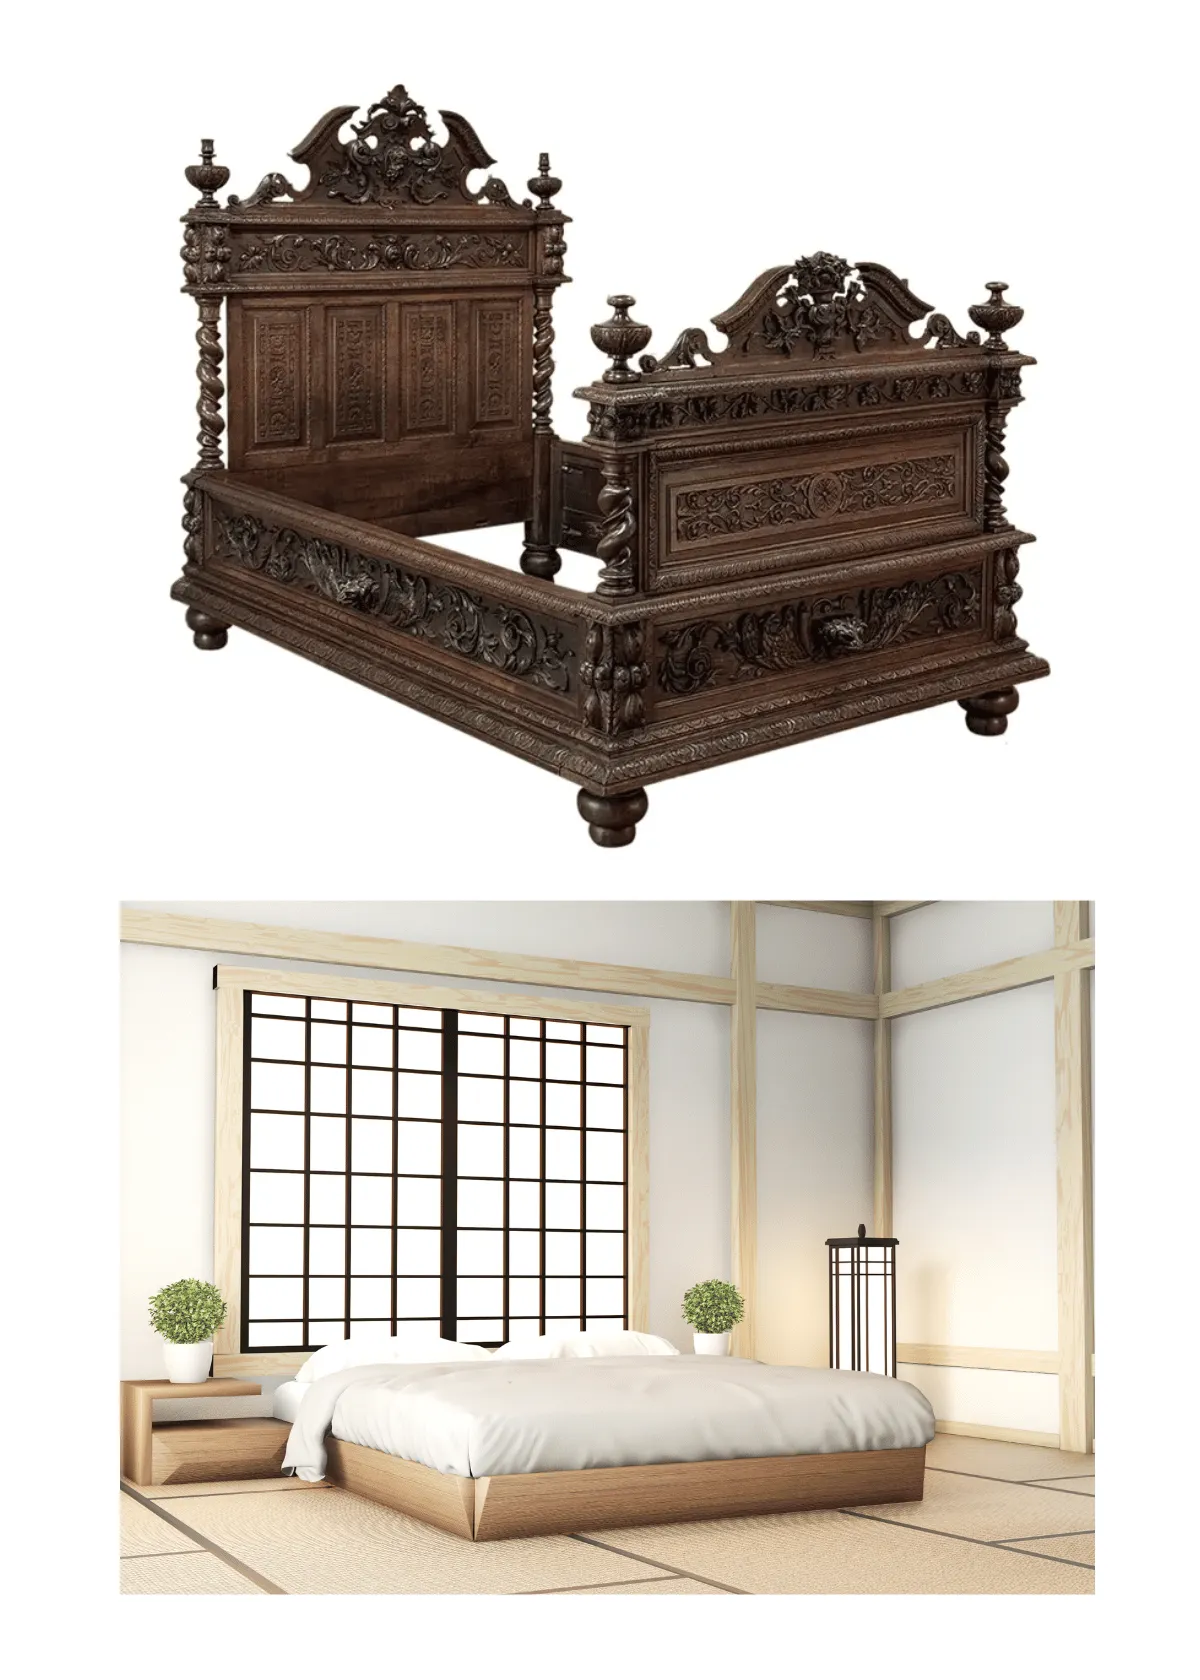 "Evolution of Bed Frames: From Traditional to Modern Designs"